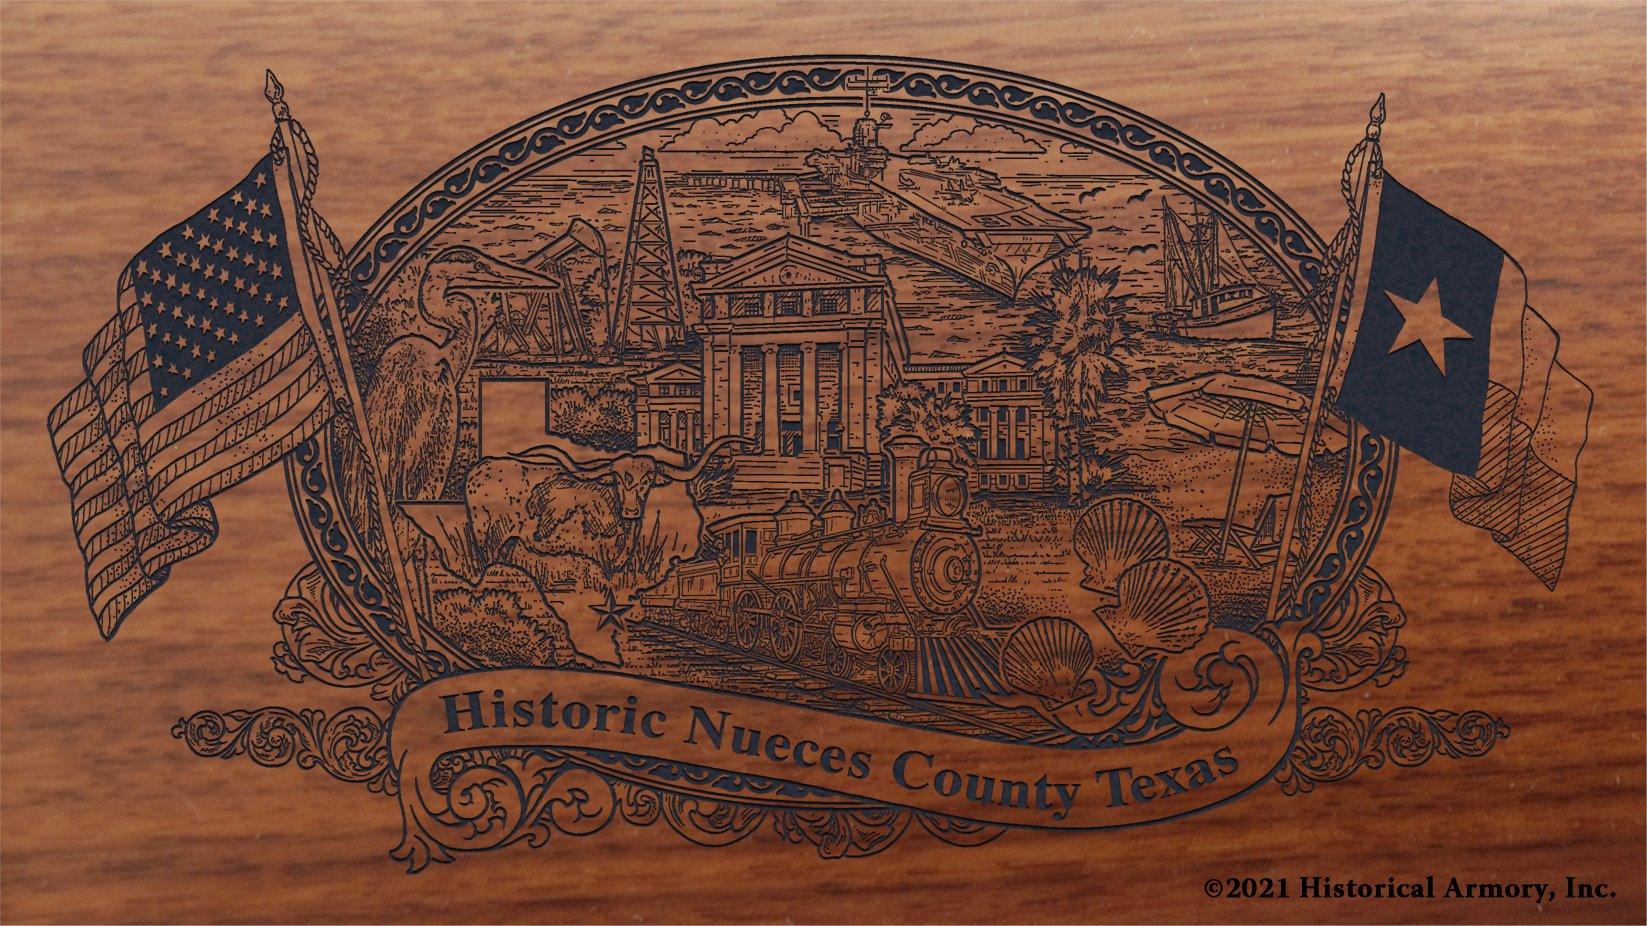 Engraved artwork | History of Nueces County Texas | Historical Armory